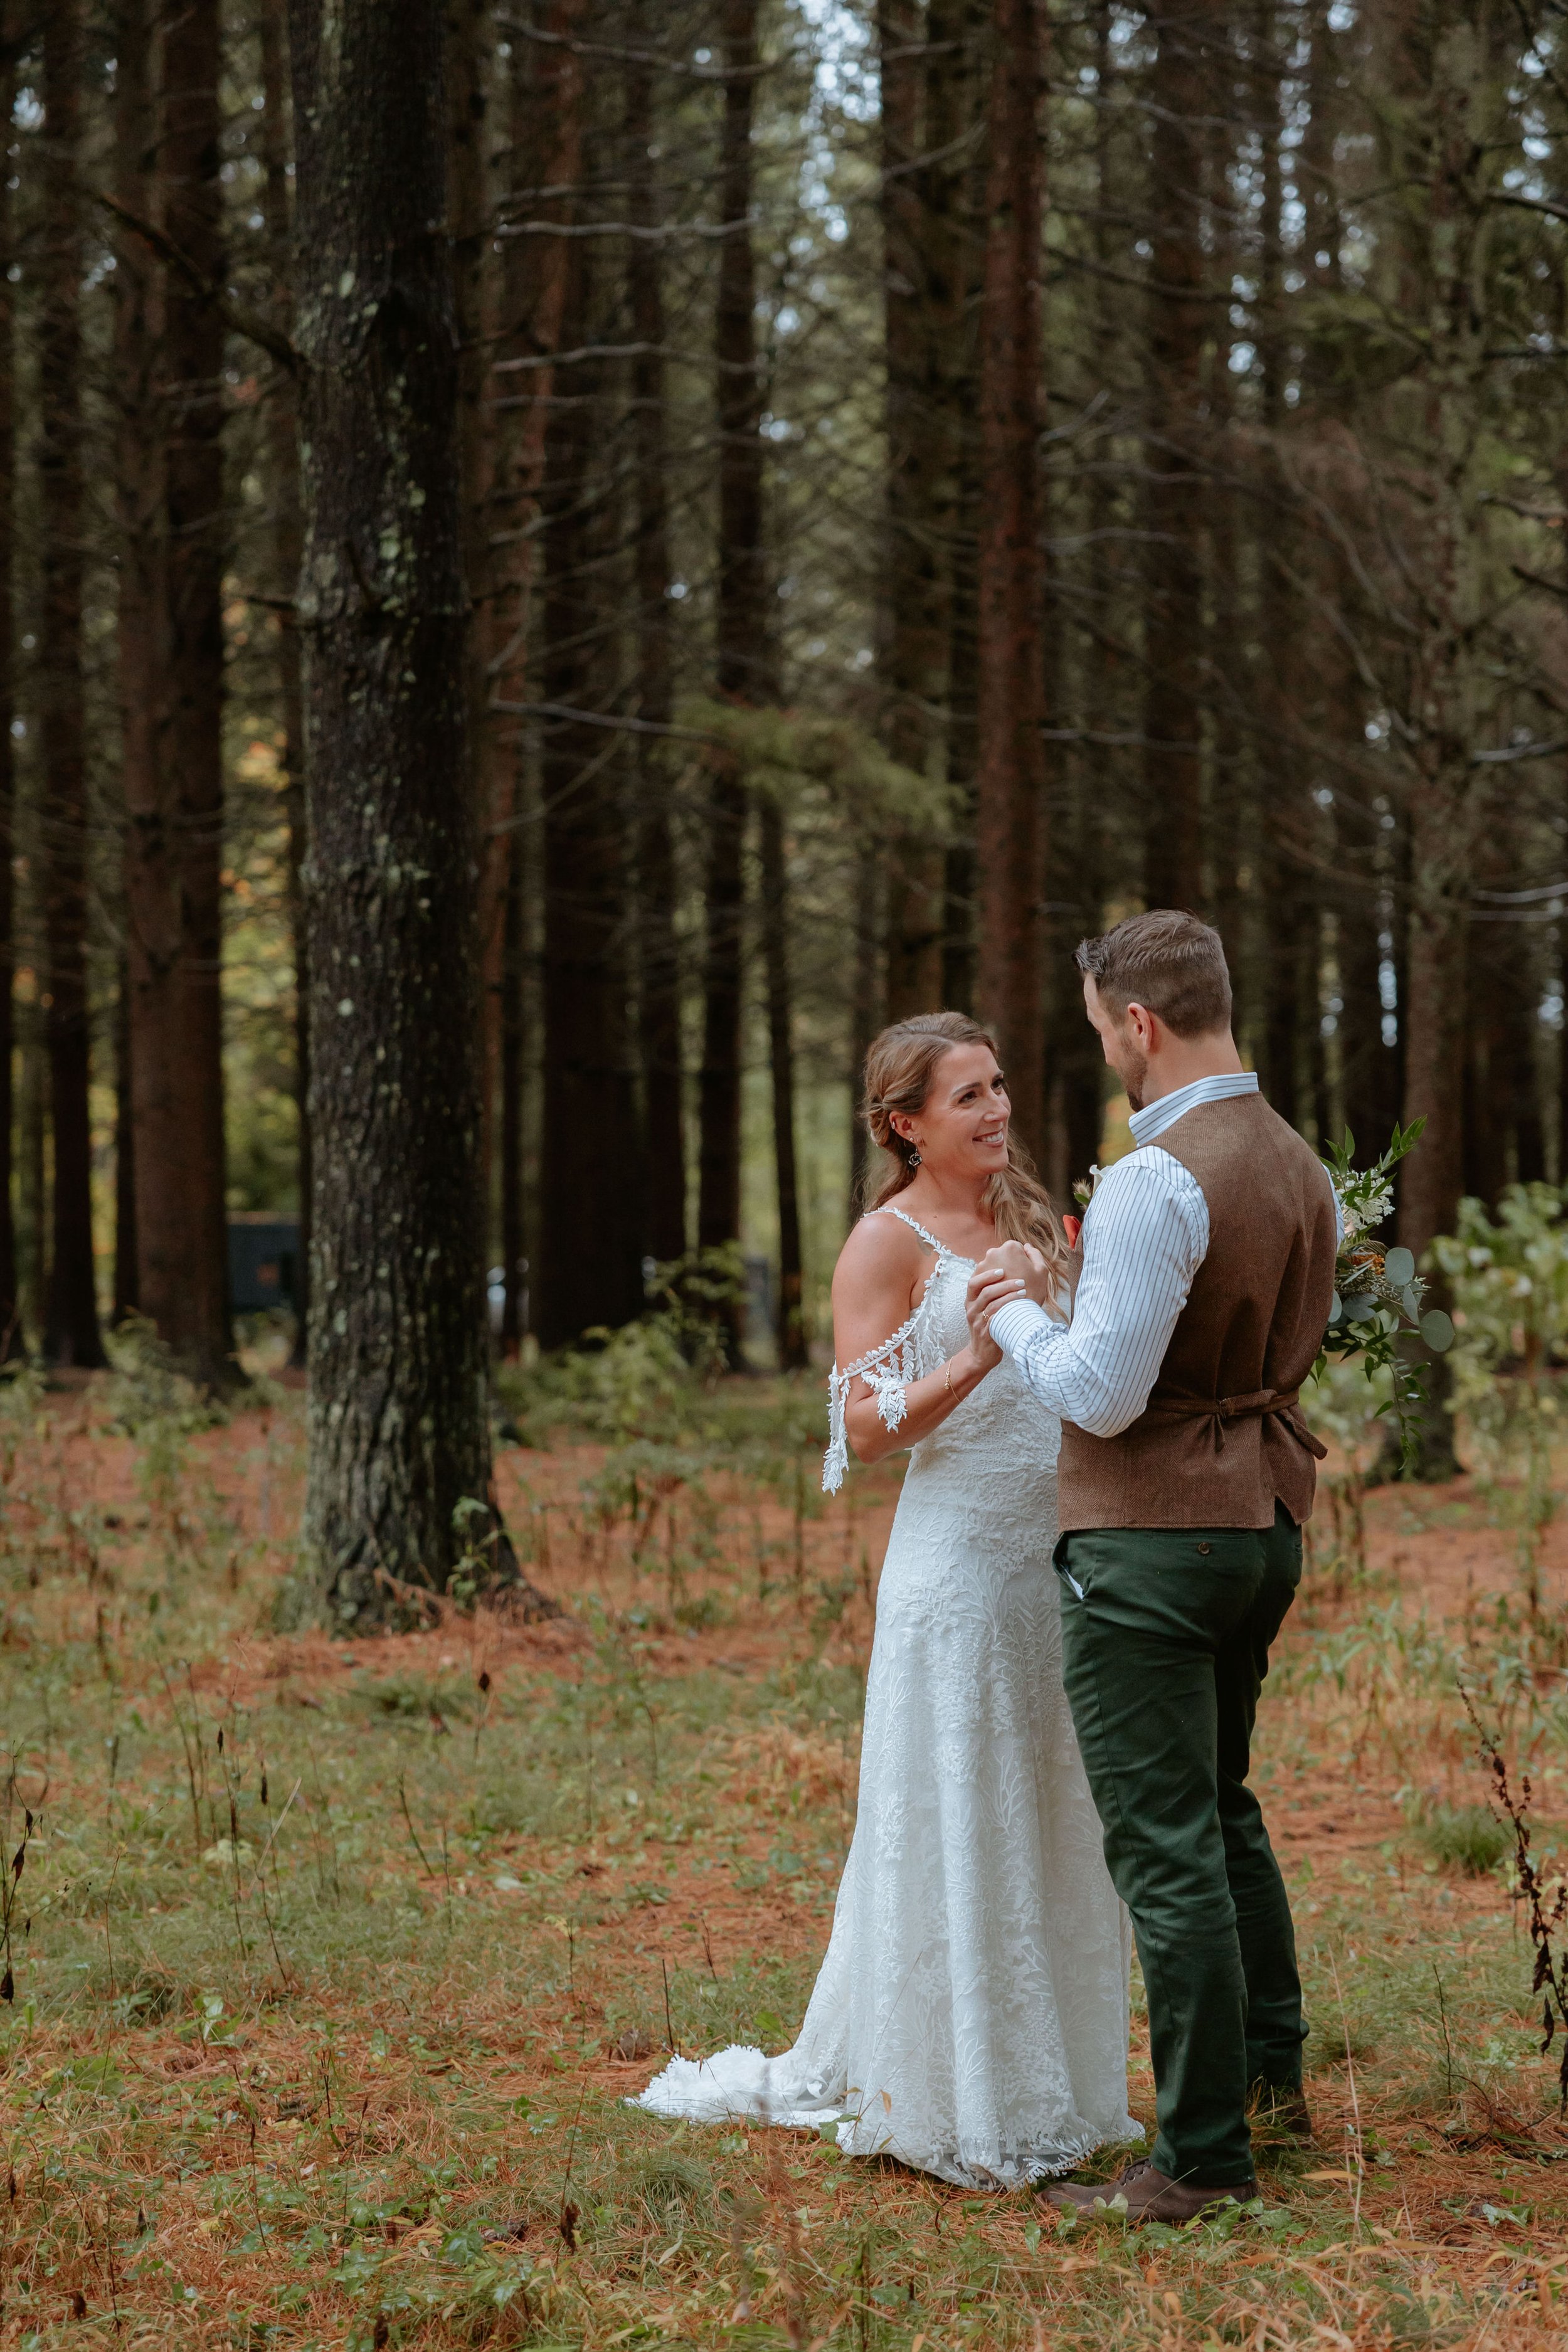 A bride and groom hold hands in a forest.